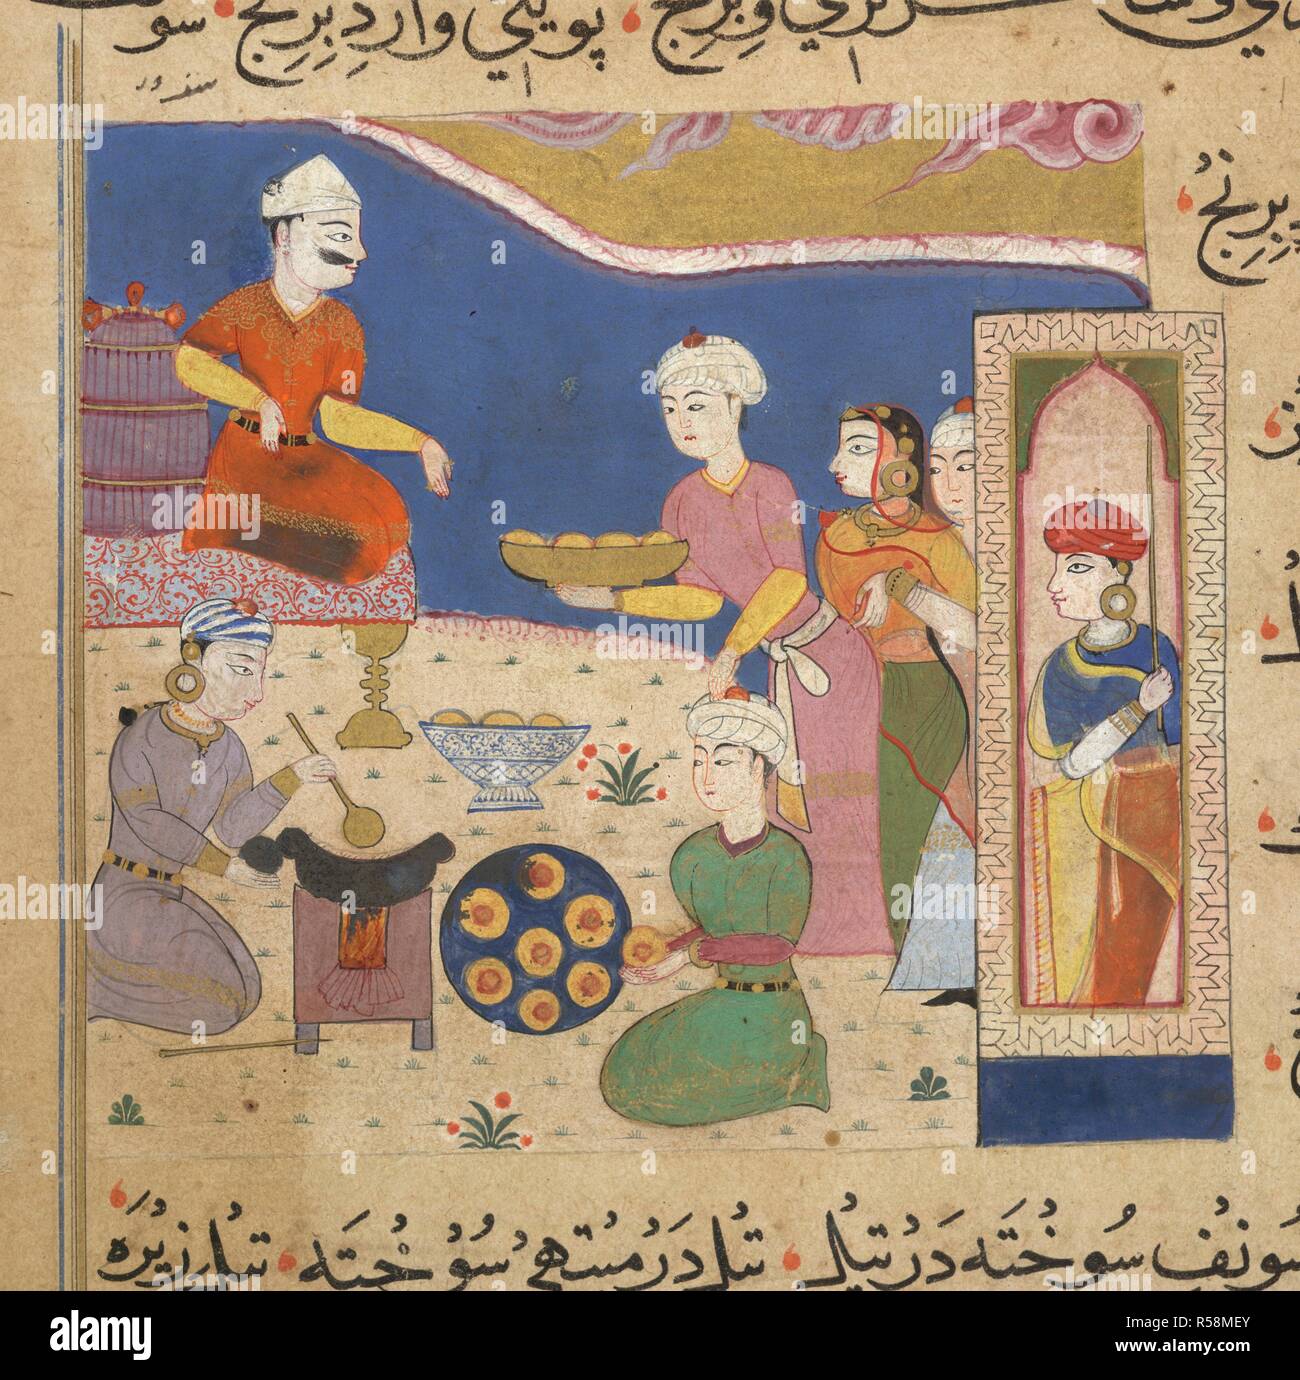 Preparation of wada. The Ni'matnama-i Nasir al-Din Shah. A manuscript o. 1495 - 1505. Preparation of wada for the Sultan Ghiyath al-Din. Opaque watercolour. Sultanate style.  Image taken from The Ni'matnama-i Nasir al-Din Shah. A manuscript on Indian cookery and the preparation of sweetmeats, spices etc.  Originally published/produced in 1495 - 1505. . Source: I.O. ISLAMIC 149, f.83v. Language: Persian. Stock Photo